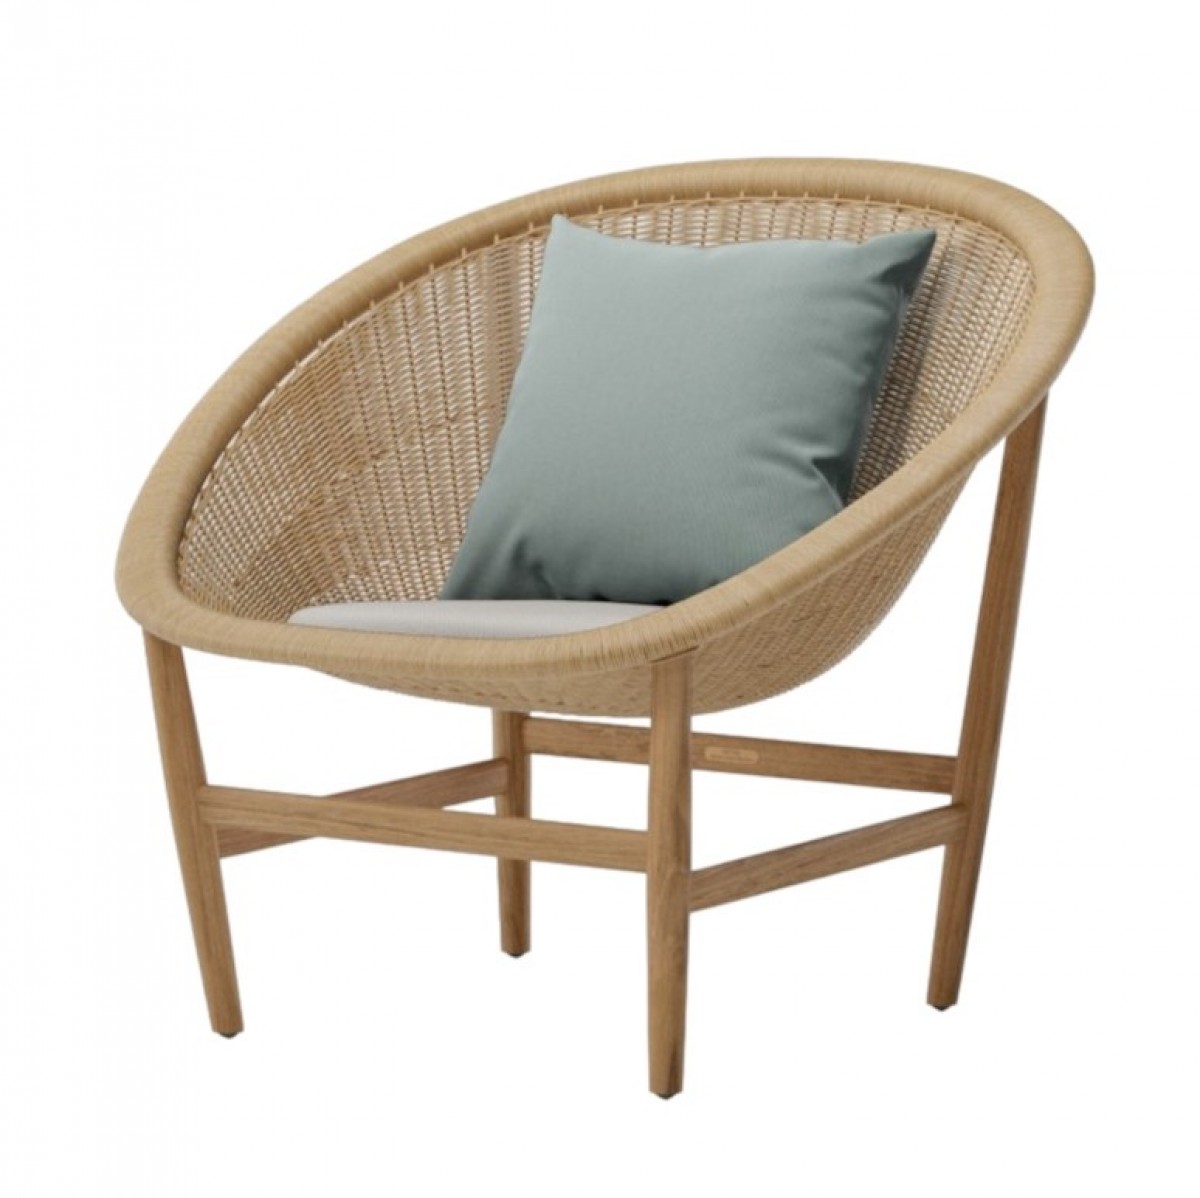 Basket Indoor Club Chair, with Seat and 1 Back Cushion